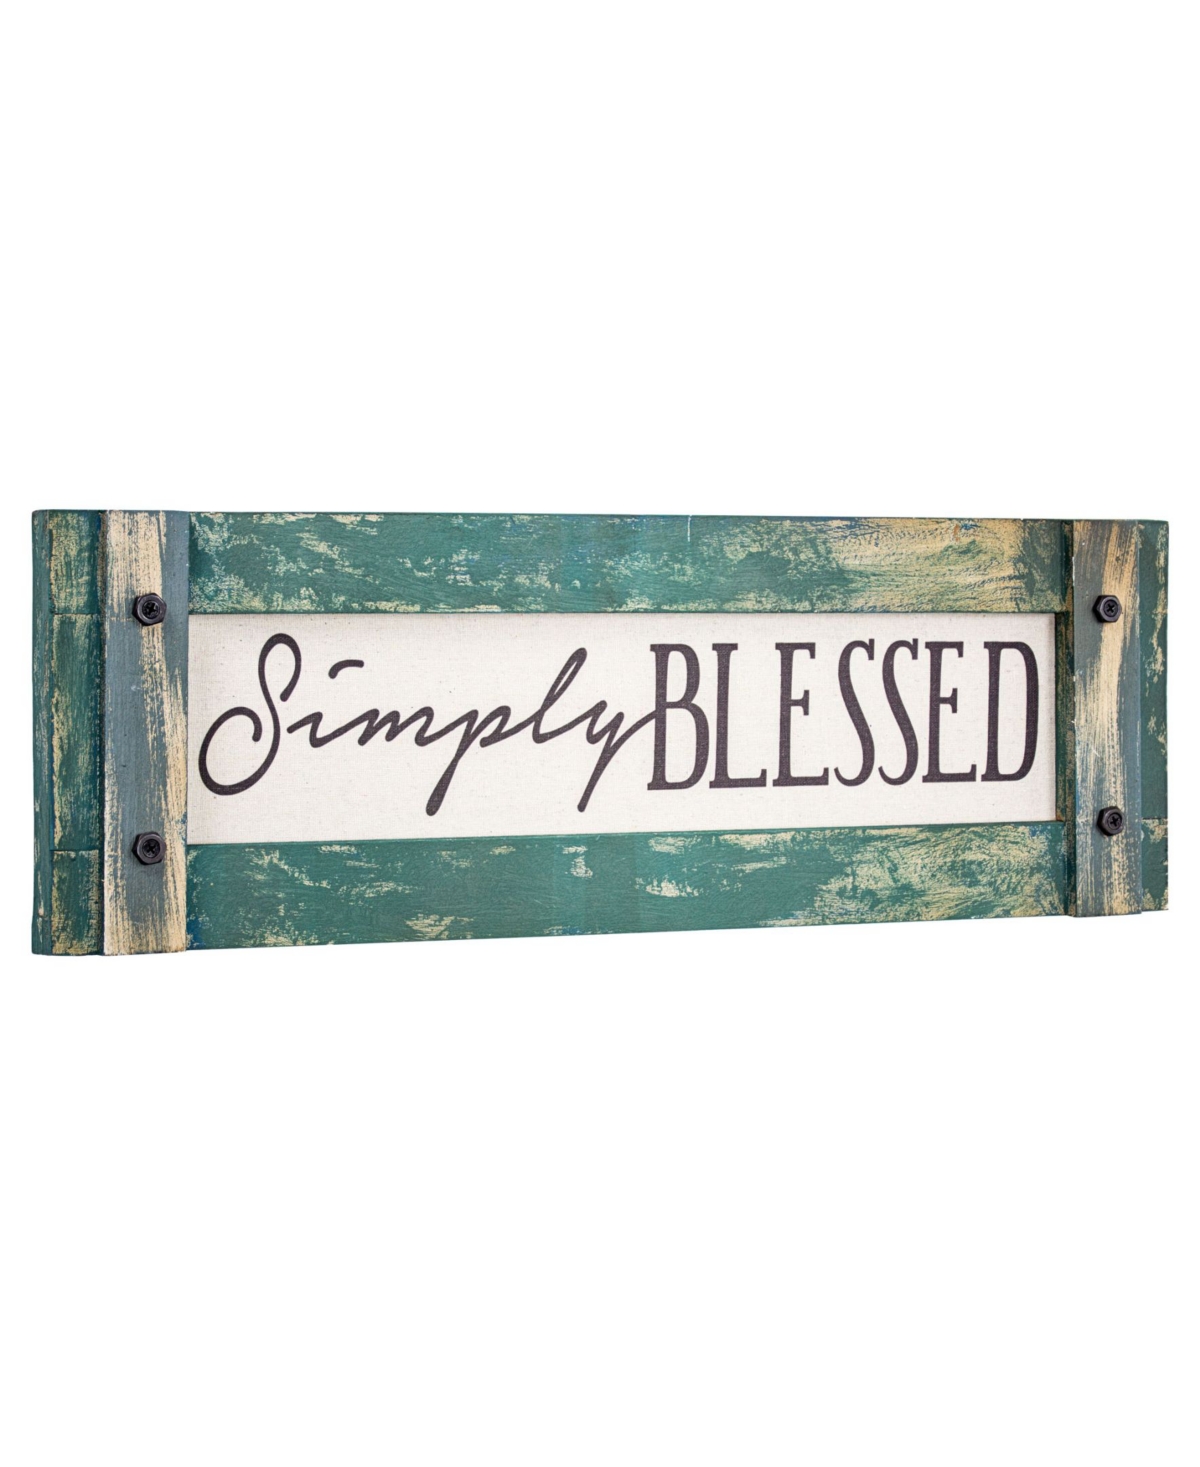 Crystal Art Gallery American Art Decor Simply Blessed Inspirational Farmhouse Sign In Multi